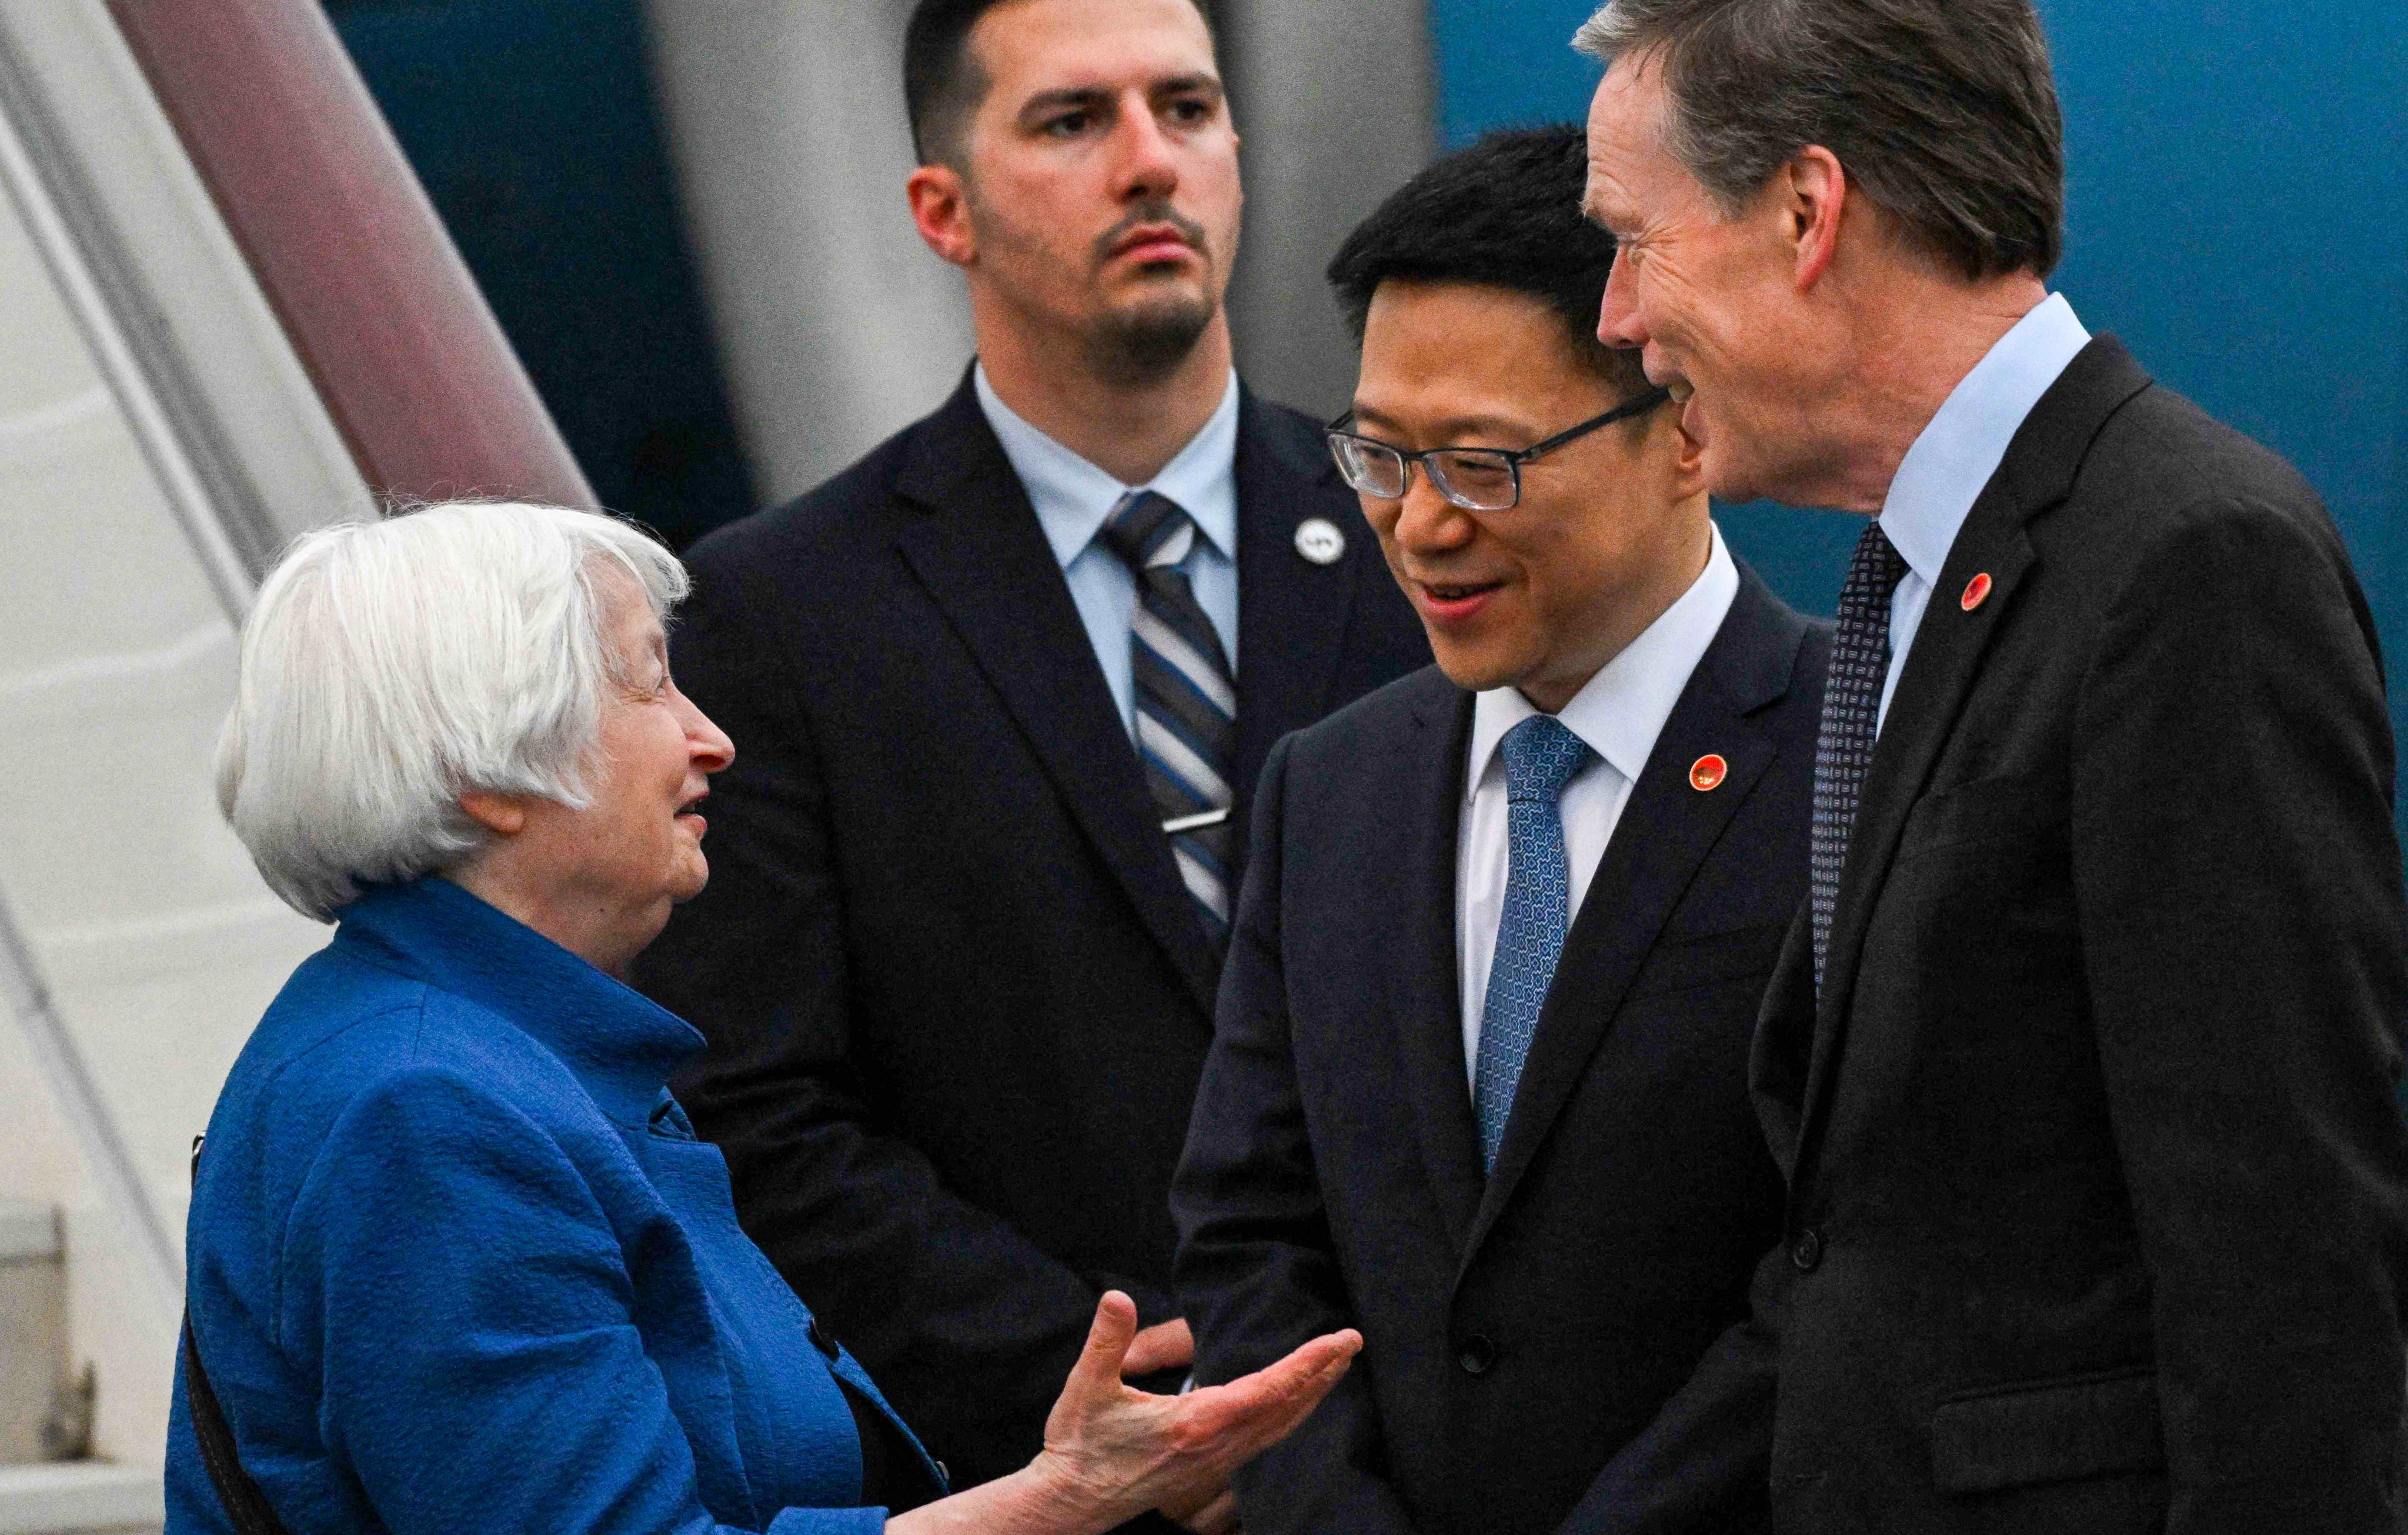 China’s Vice Minister of Finance Liao Min (second from right) and US Ambassador to China Nicholas Burns (far right) greet US Treasury Secretary Janet Yellen at Baiyun International Airport in Guangzhou. Photo: AFP